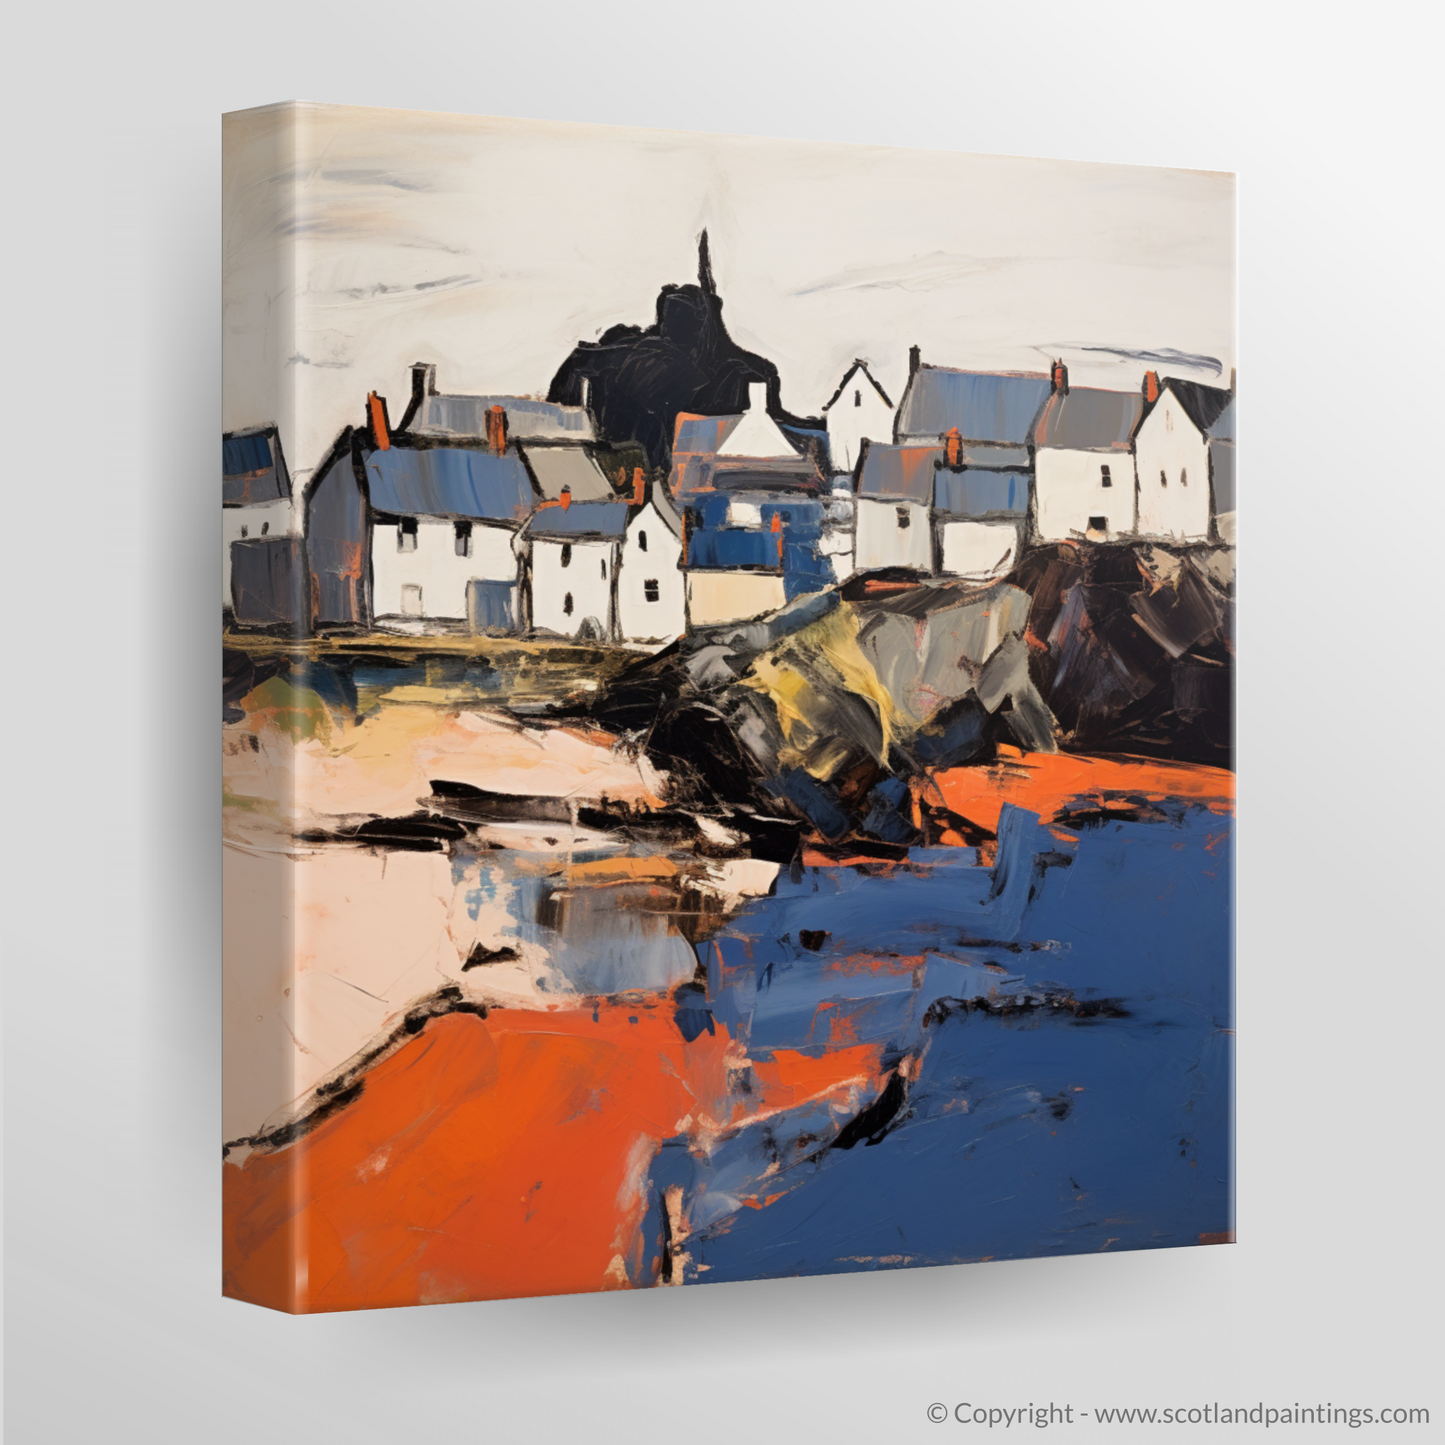 Aberdeenshire Enigma: Stonehaven's Abstract Impressions